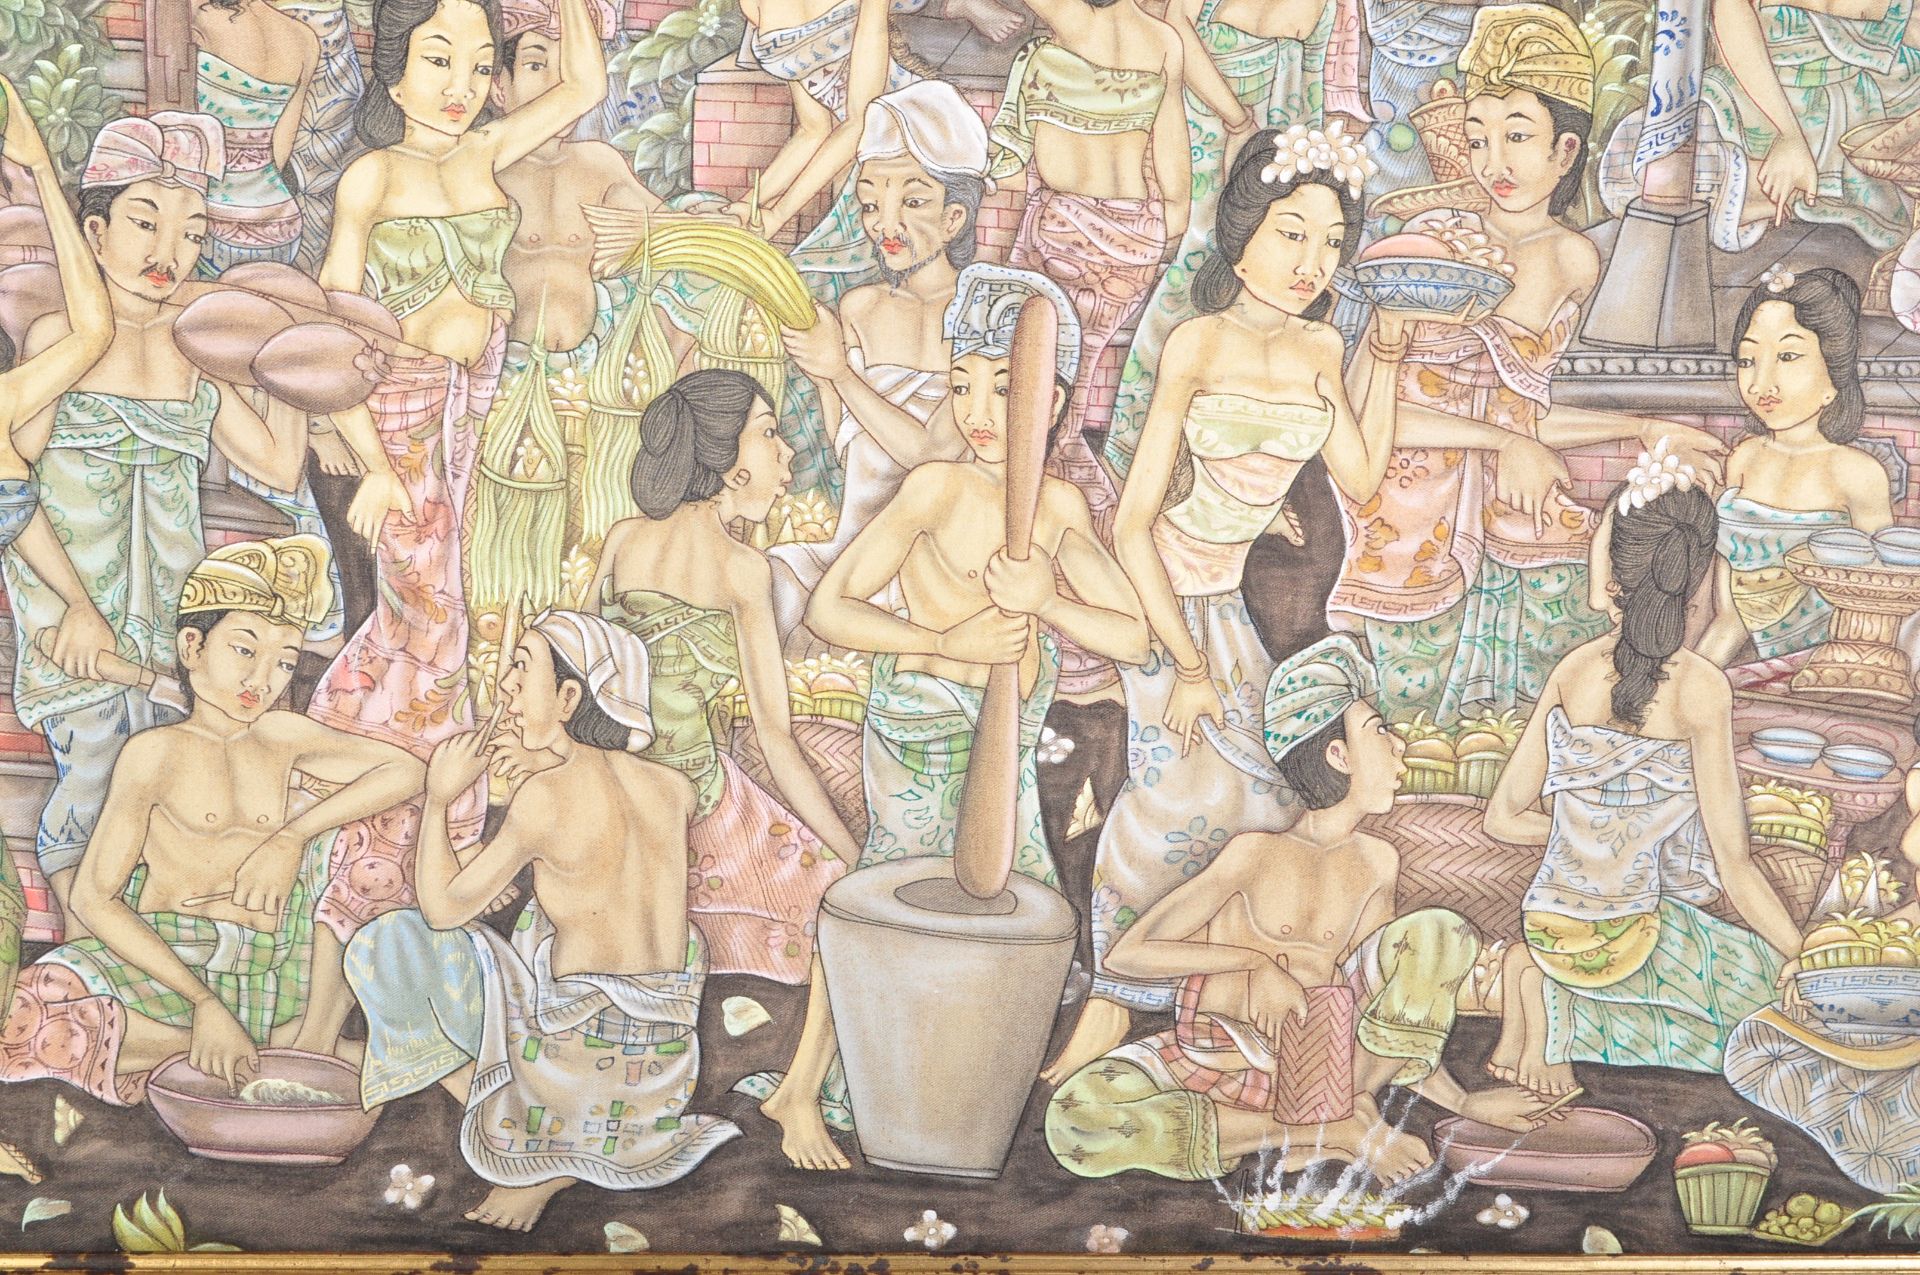 20TH CENTURY INDONESIAN BALINESE PAINTING - Image 3 of 5